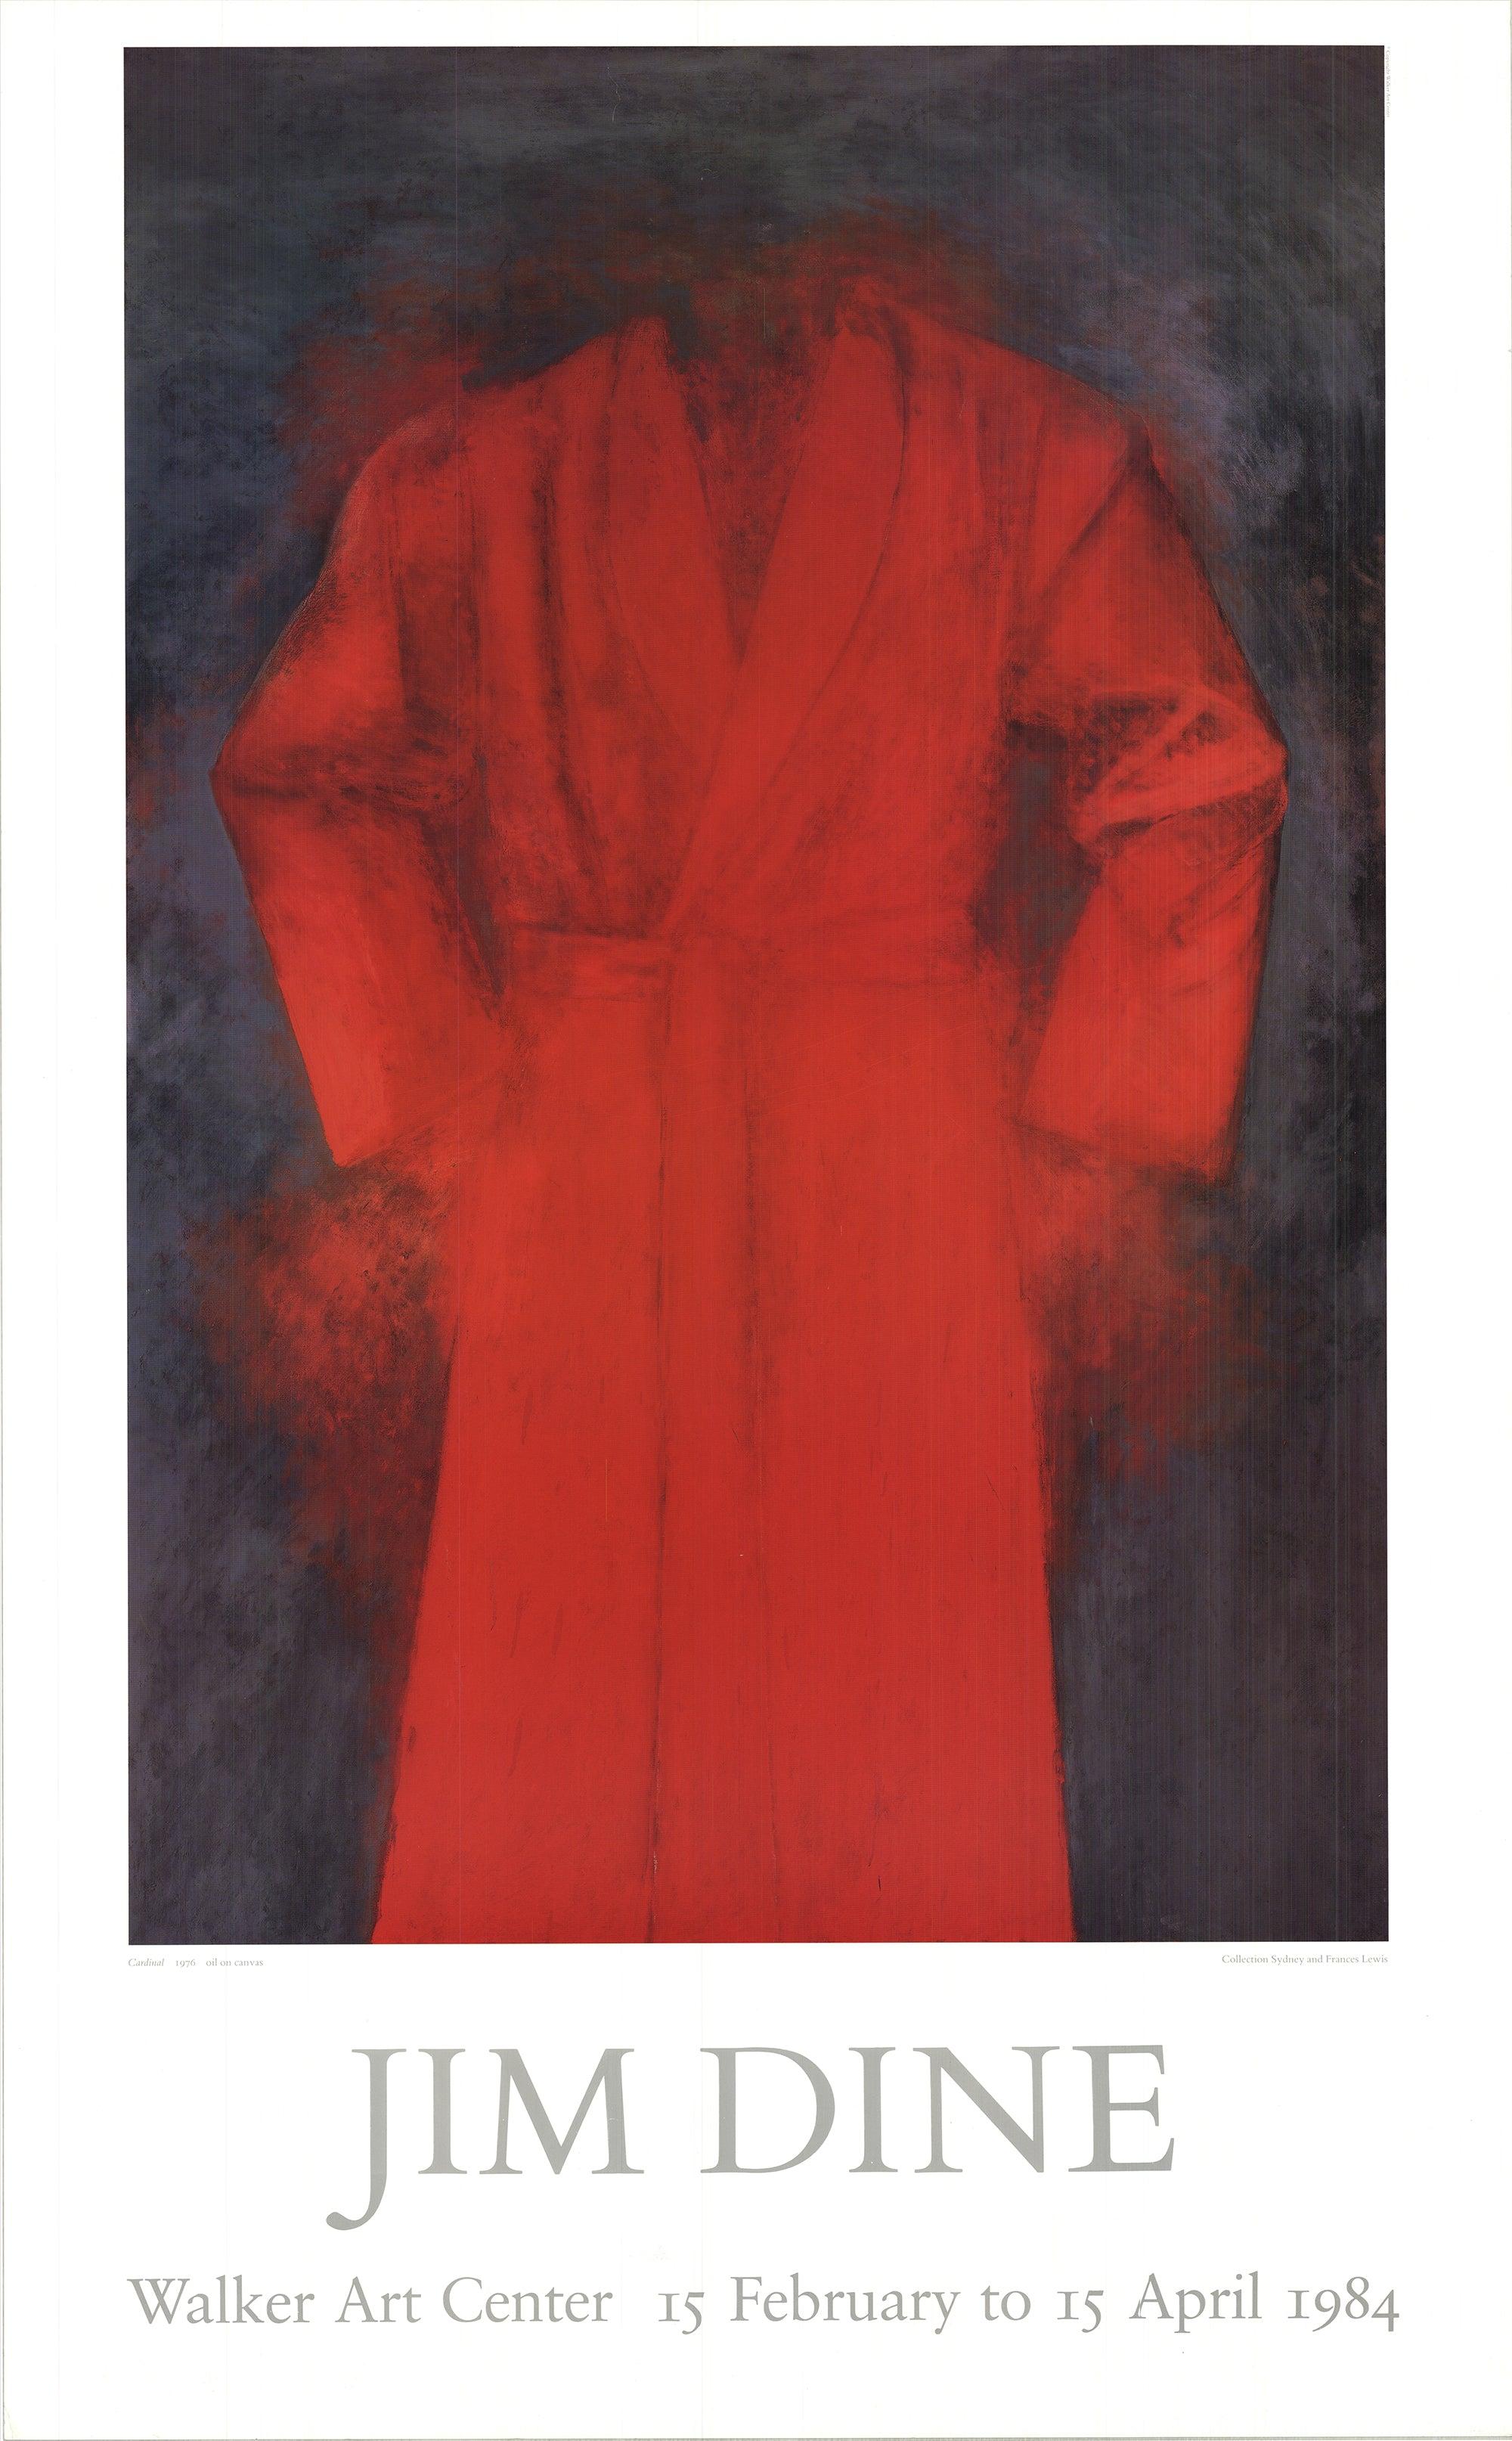 Jim Dine's exhibition at the Walker Art Center in 1984, featuring a poster representing a Cardinal Robe in dark red, marked a significant moment in the artist's career and the cultural landscape of Minneapolis, Minnesota.

The Walker Art Center,